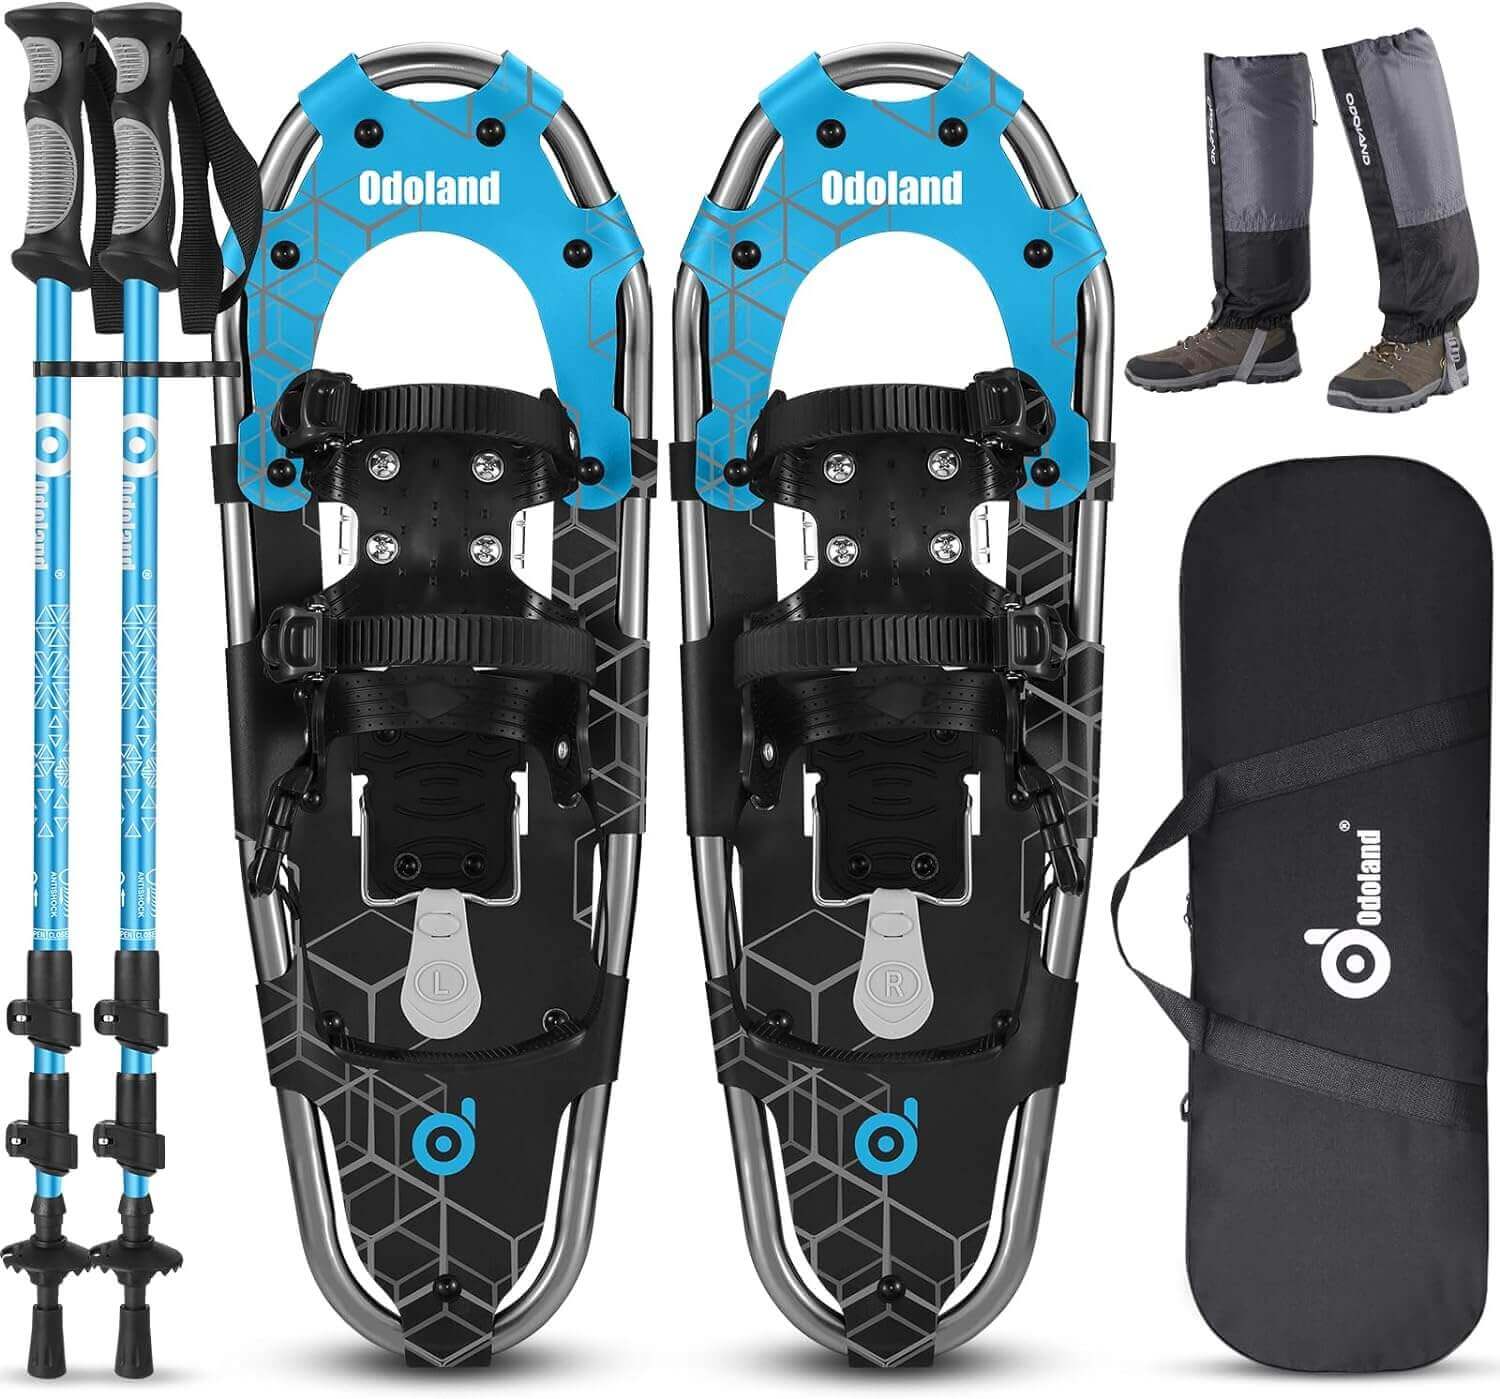 Shop The Latest >4-in-1 Snowshoes Set-Trekking Poles, Snow Leg Gaiters & Bag > *Only $117.44*> From The Top Brand > *Odolandl* > Shop Now and Get Free Shipping On Orders Over $45.00 >*Shop Earth Foot*